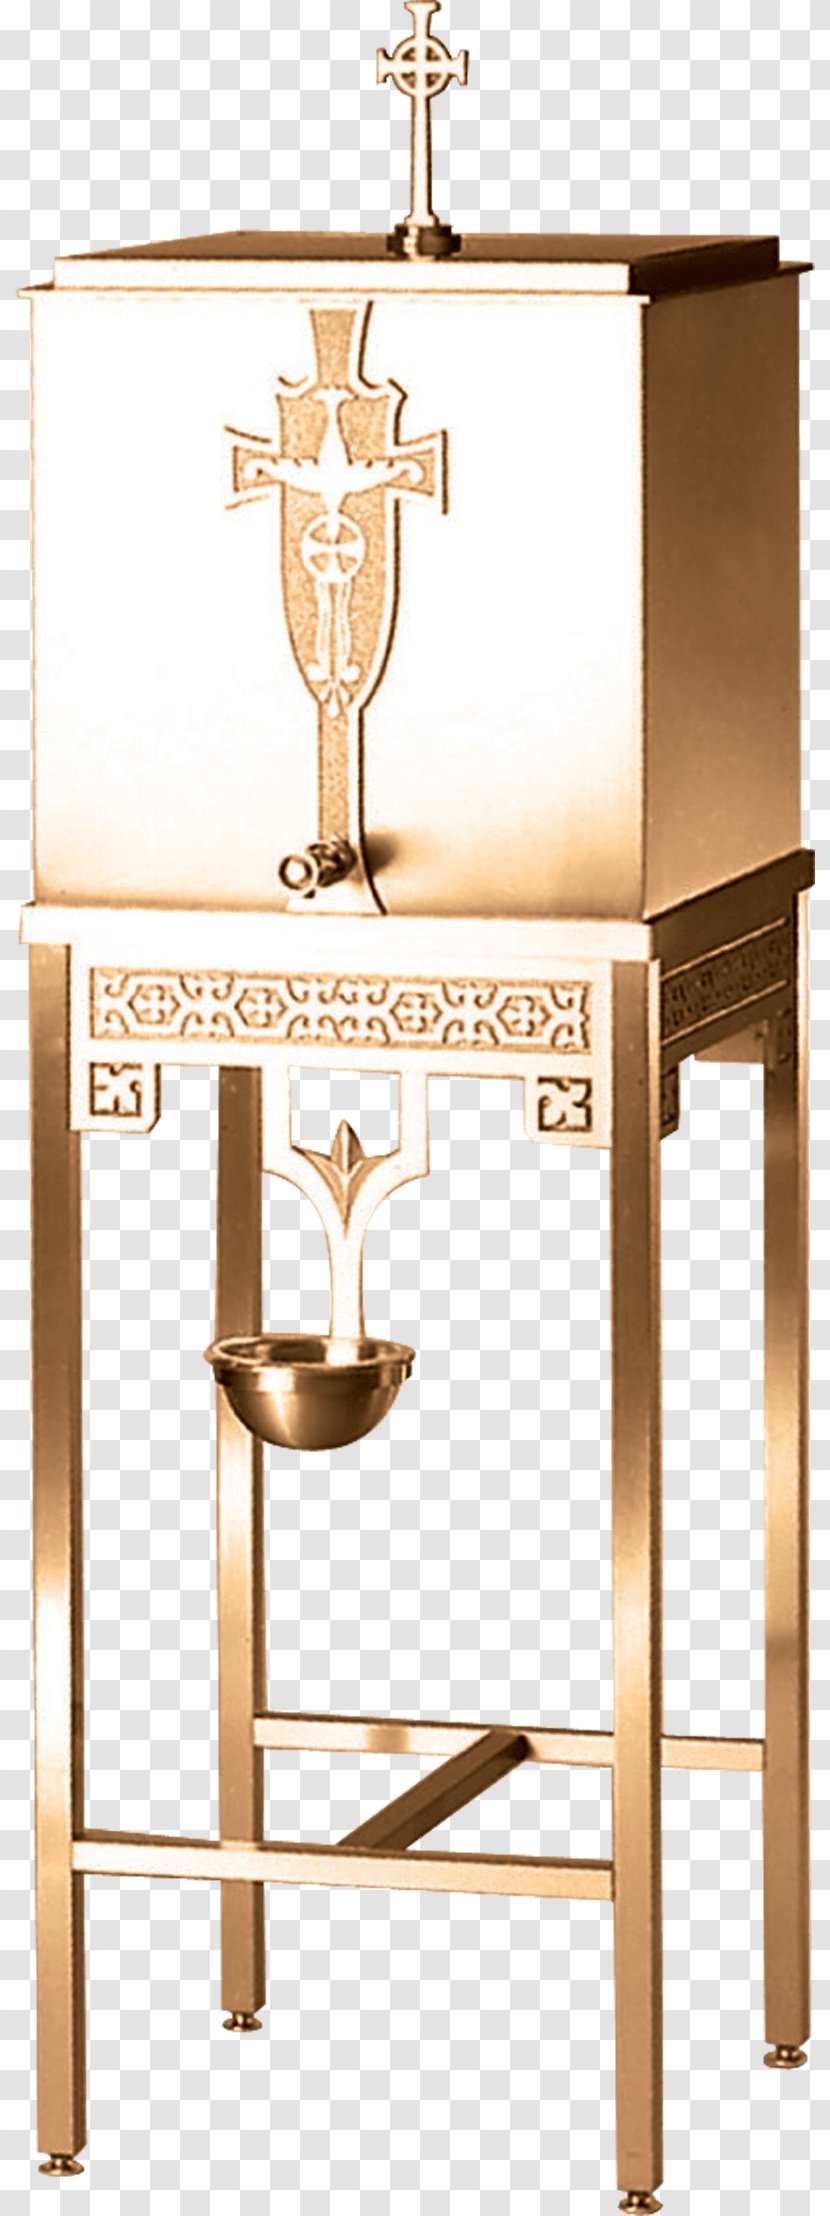 Holy Water Font Apostolic Constitutions Altar Baptismal - Religious Supplies Transparent PNG